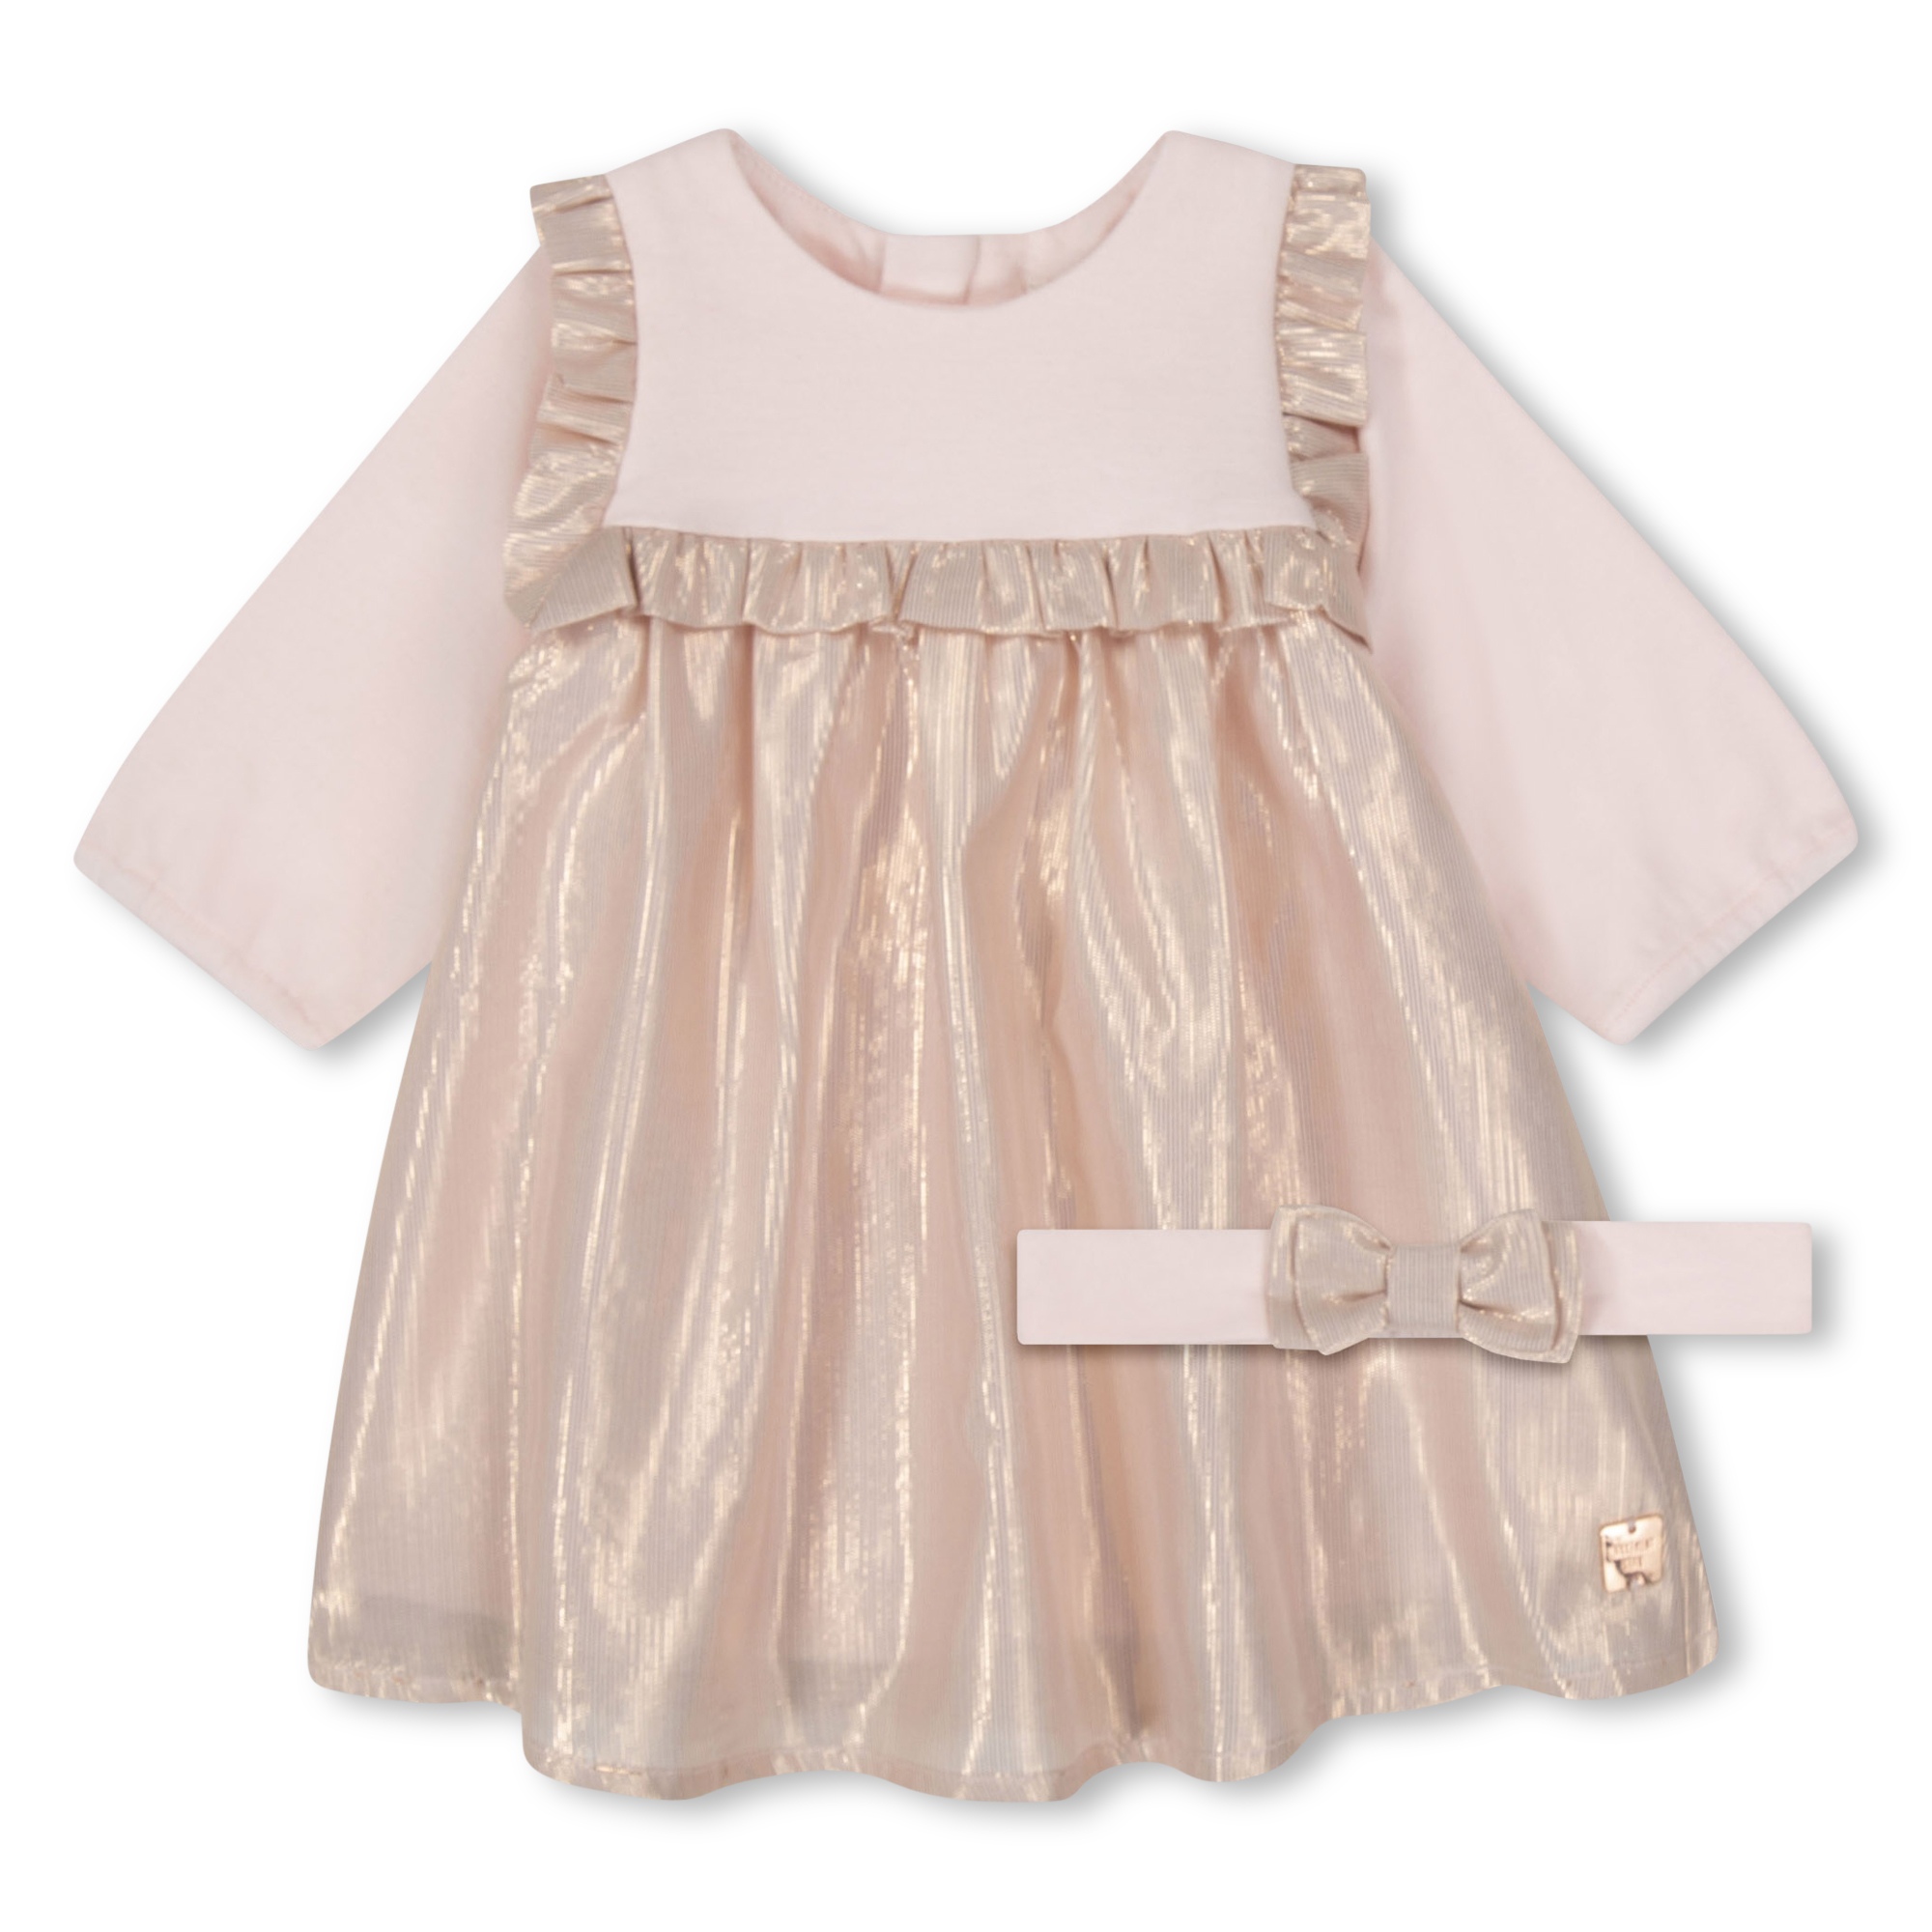 Dress with matching headband CARREMENT BEAU for GIRL